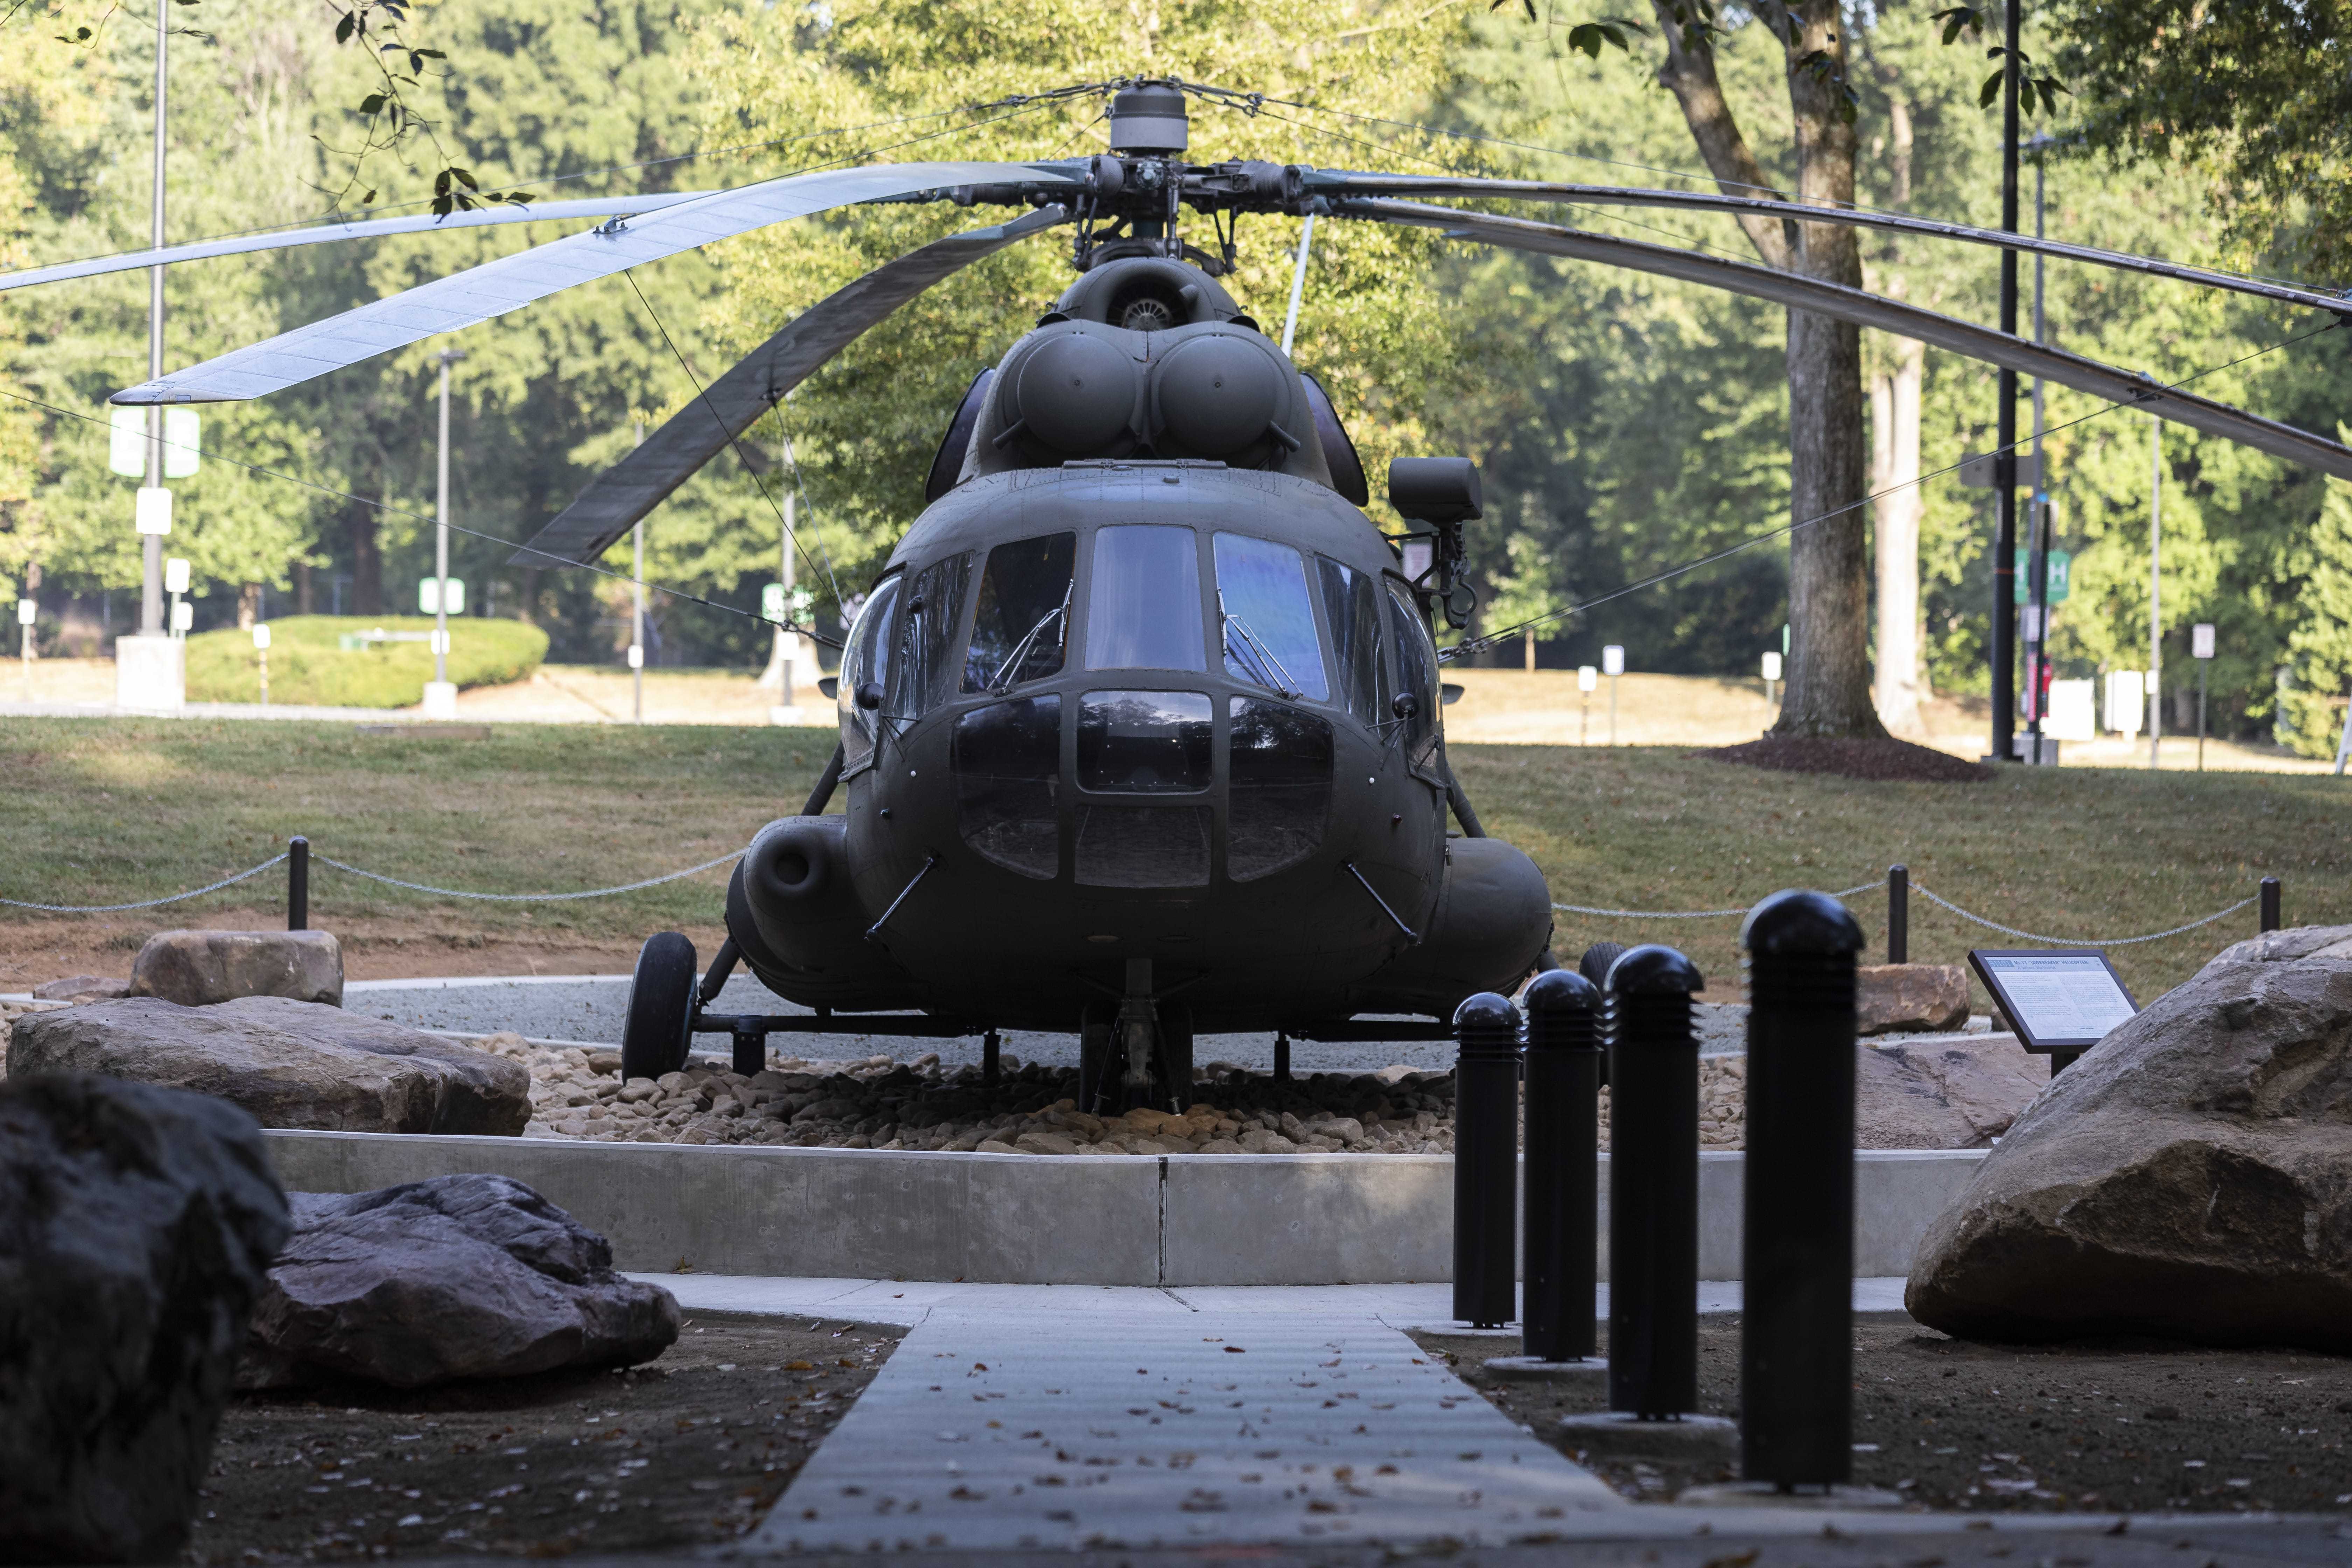 Frontal view of Mi-17 helicopter on display at CIA Headquarters.